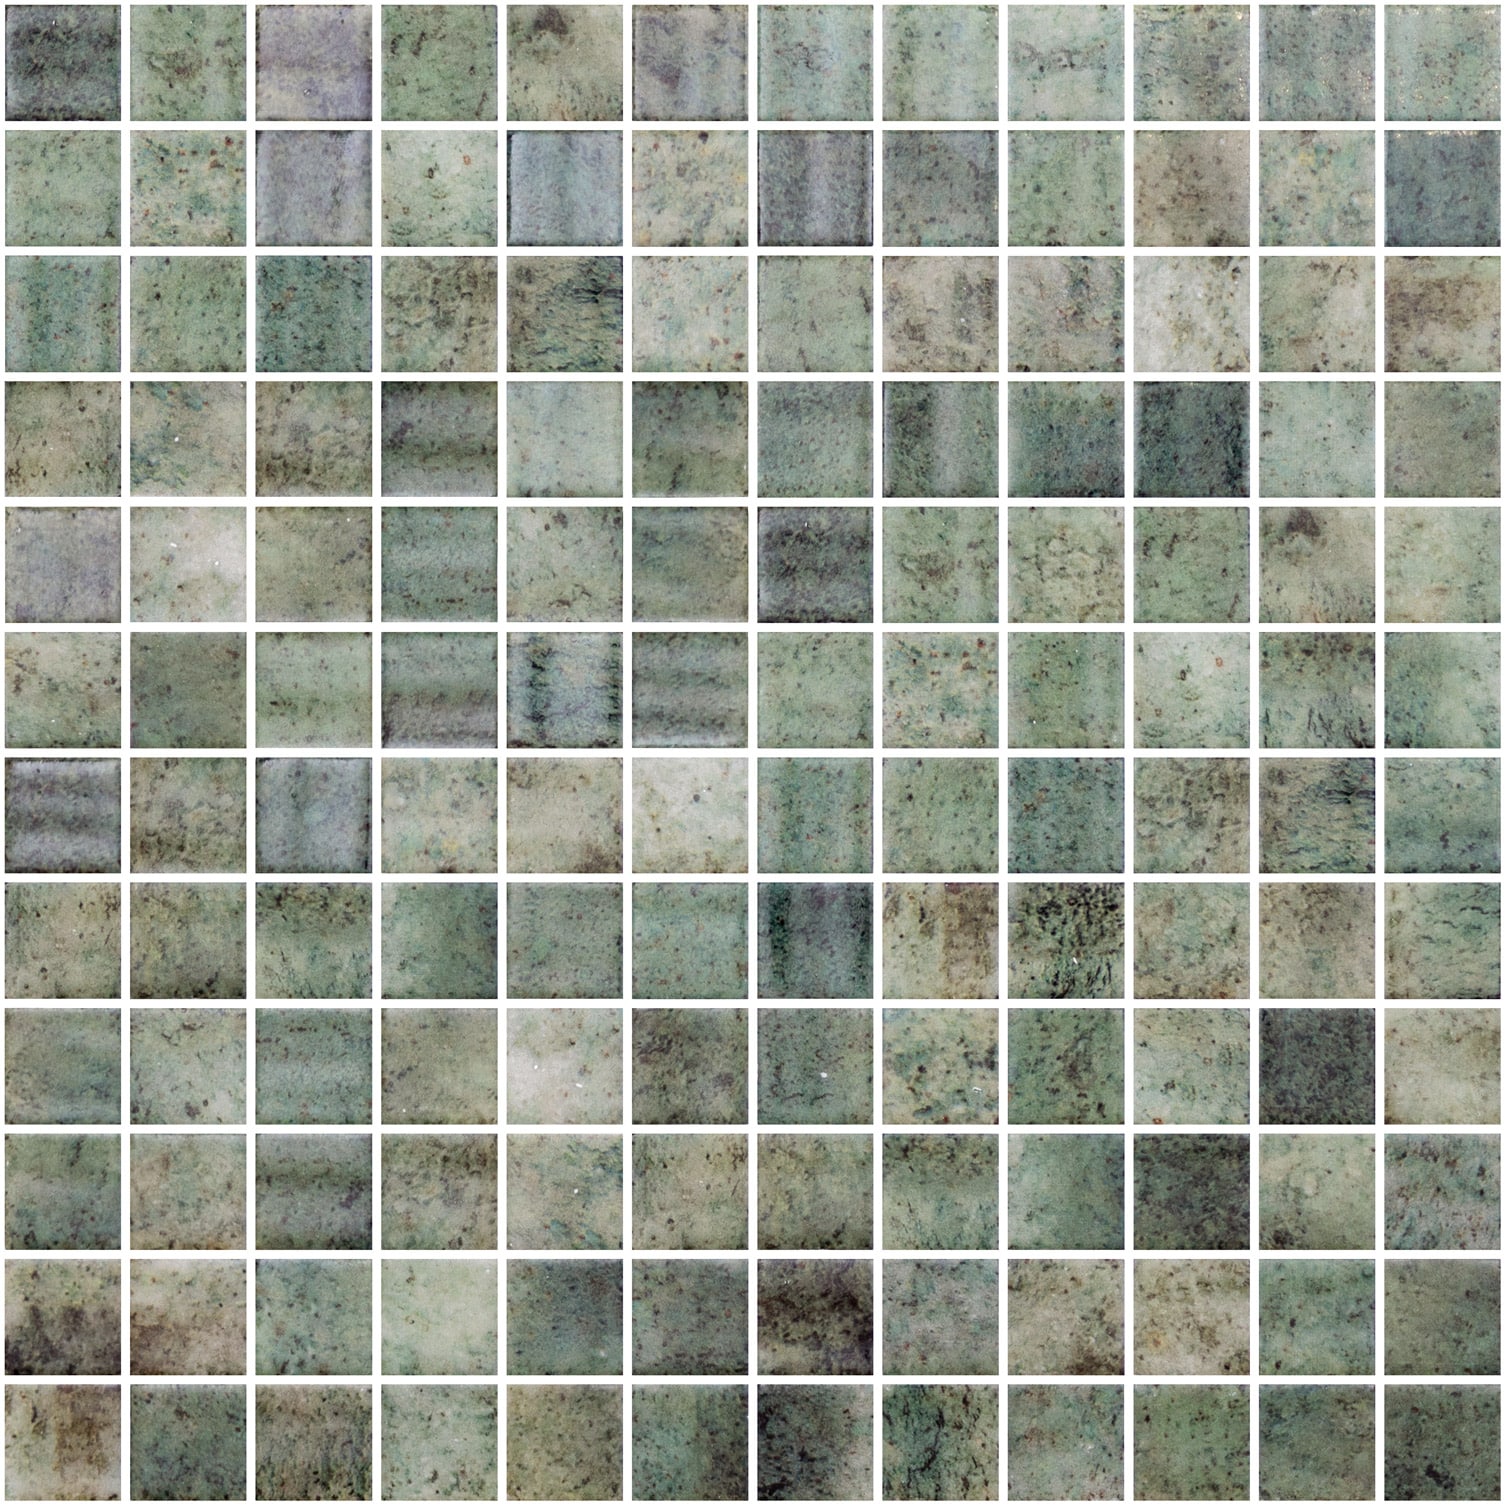 BALI STONE_RMS TRADERS_NATURAL STONE POOL MOSAIC SUPPLIER MELBOURNE (1)